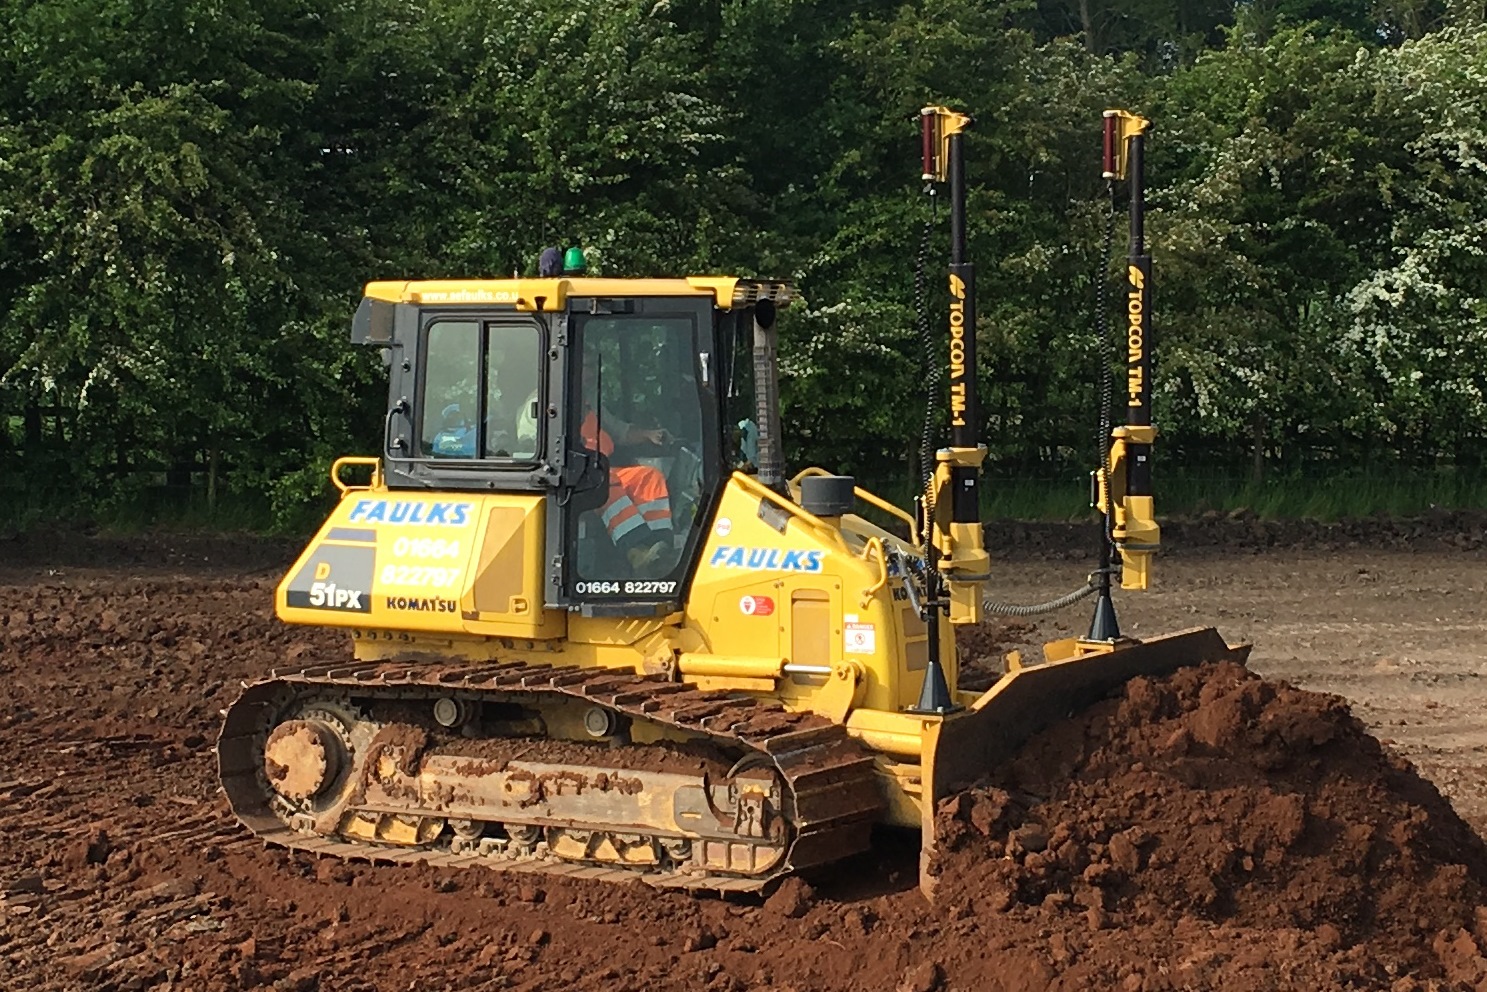 The D51 Dozer available for plant hire in from AE Faulks in use on construction site.